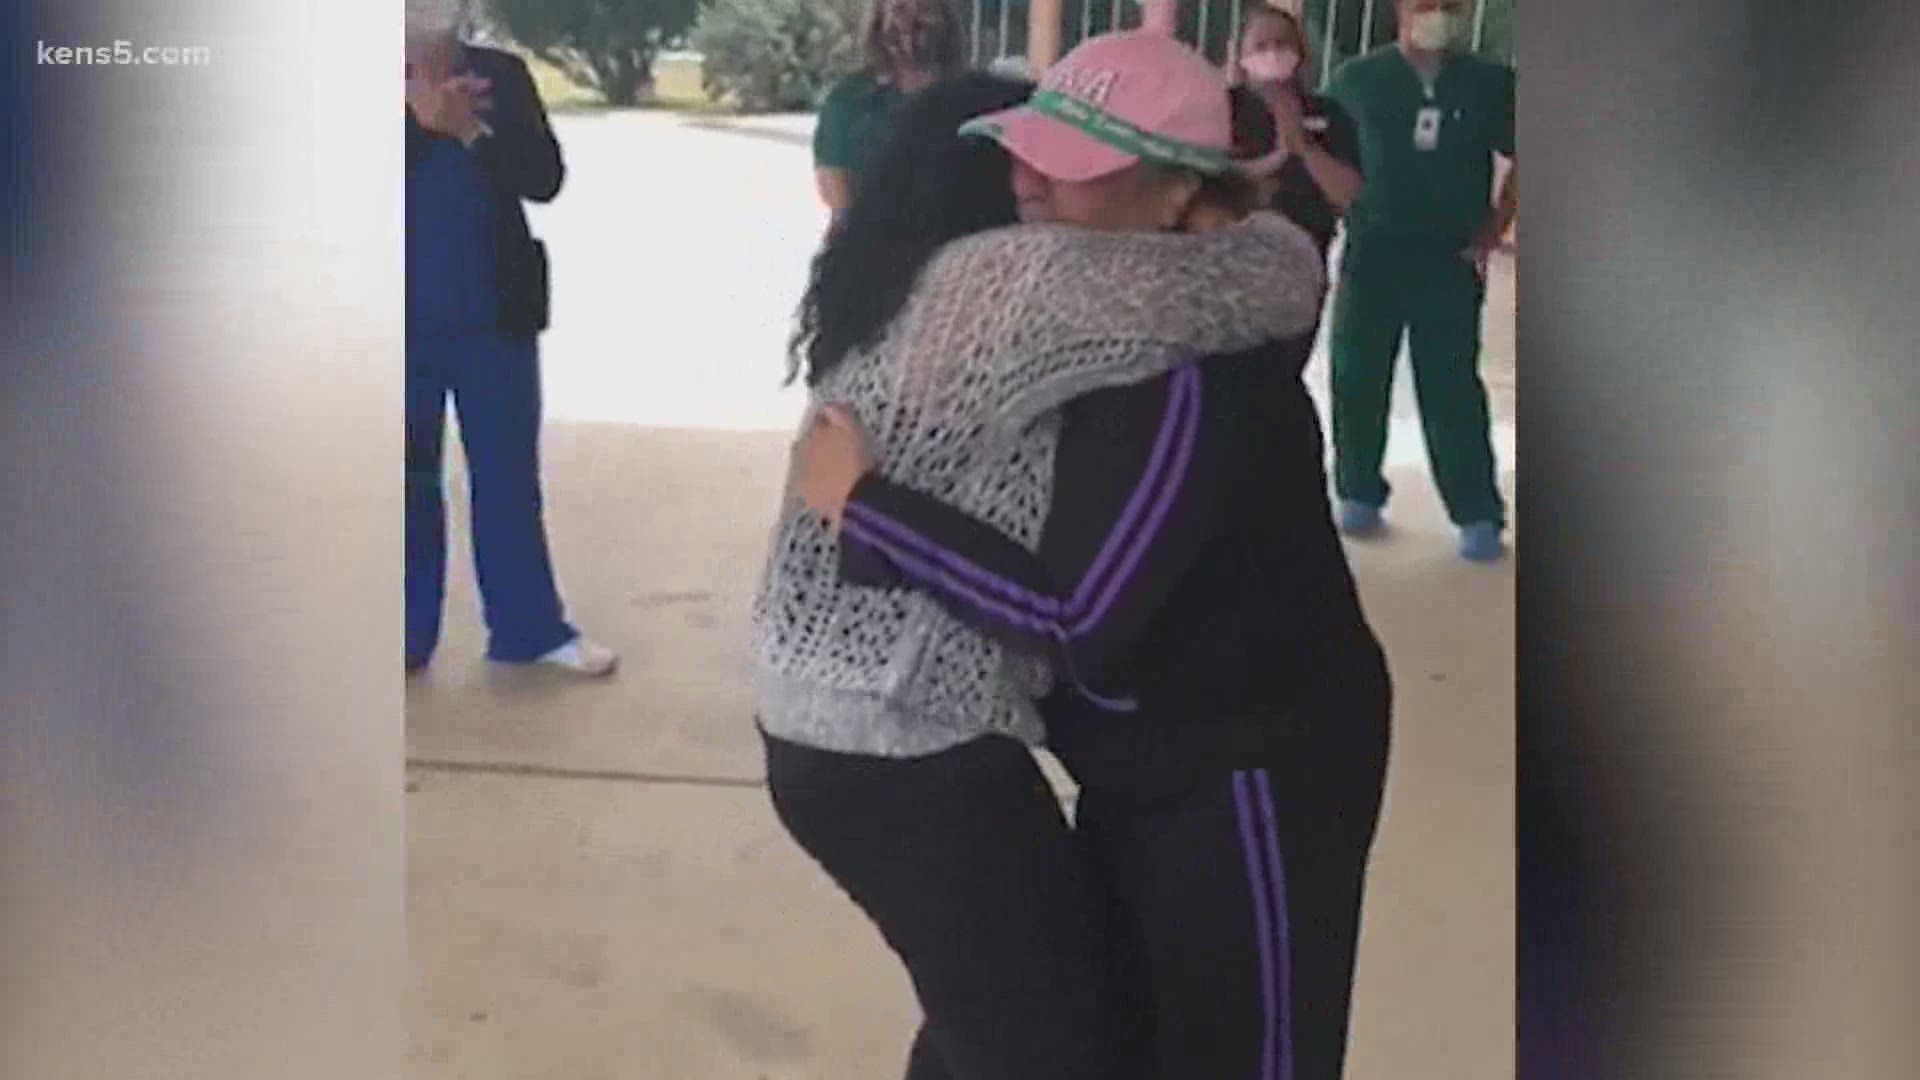 A 65-year-old former San Antonio ISD teacher beats coronavirus. Jeremy Baker shares the moment she walked out of the hospital doors and reunited with her daughter.